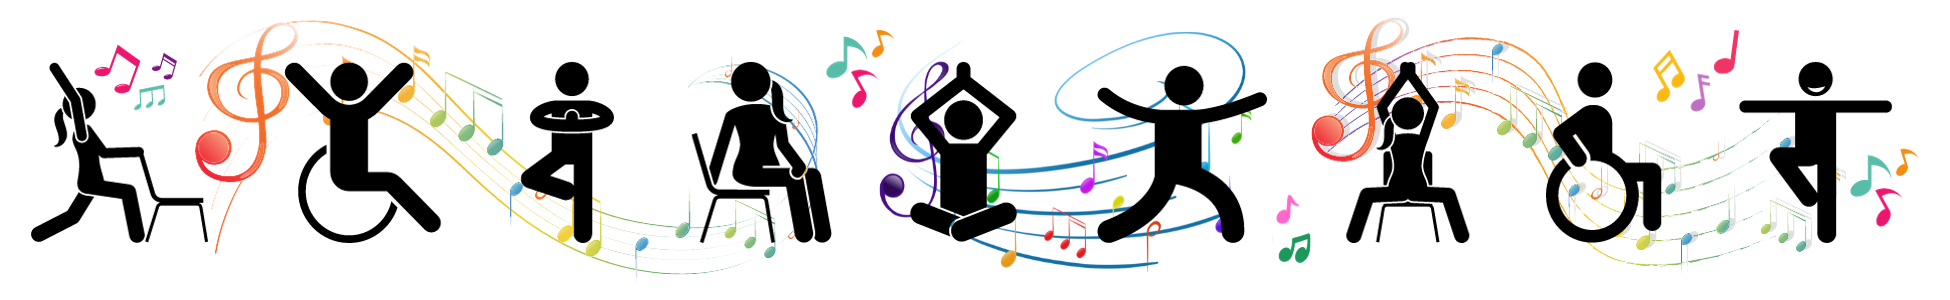 Icons of individuals dancing and performing exercises while seated, standing and using mobility devices.